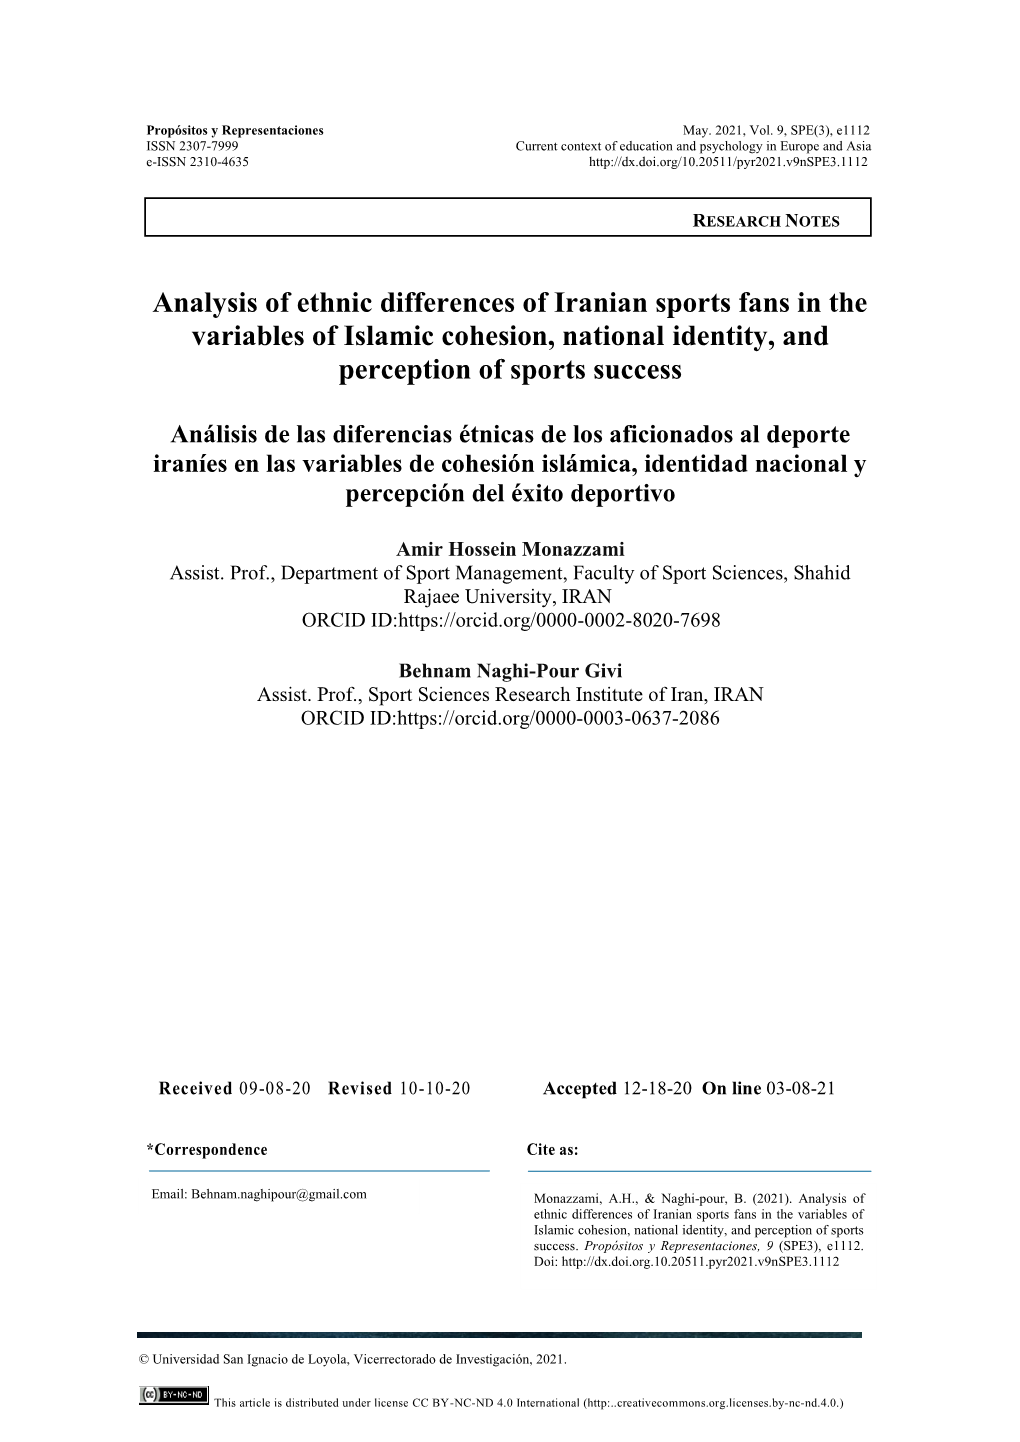 Analysis of Ethnic Differences of Iranian Sports Fans in the Variables of Islamic Cohesion, National Identity, and Perception of Sports Success